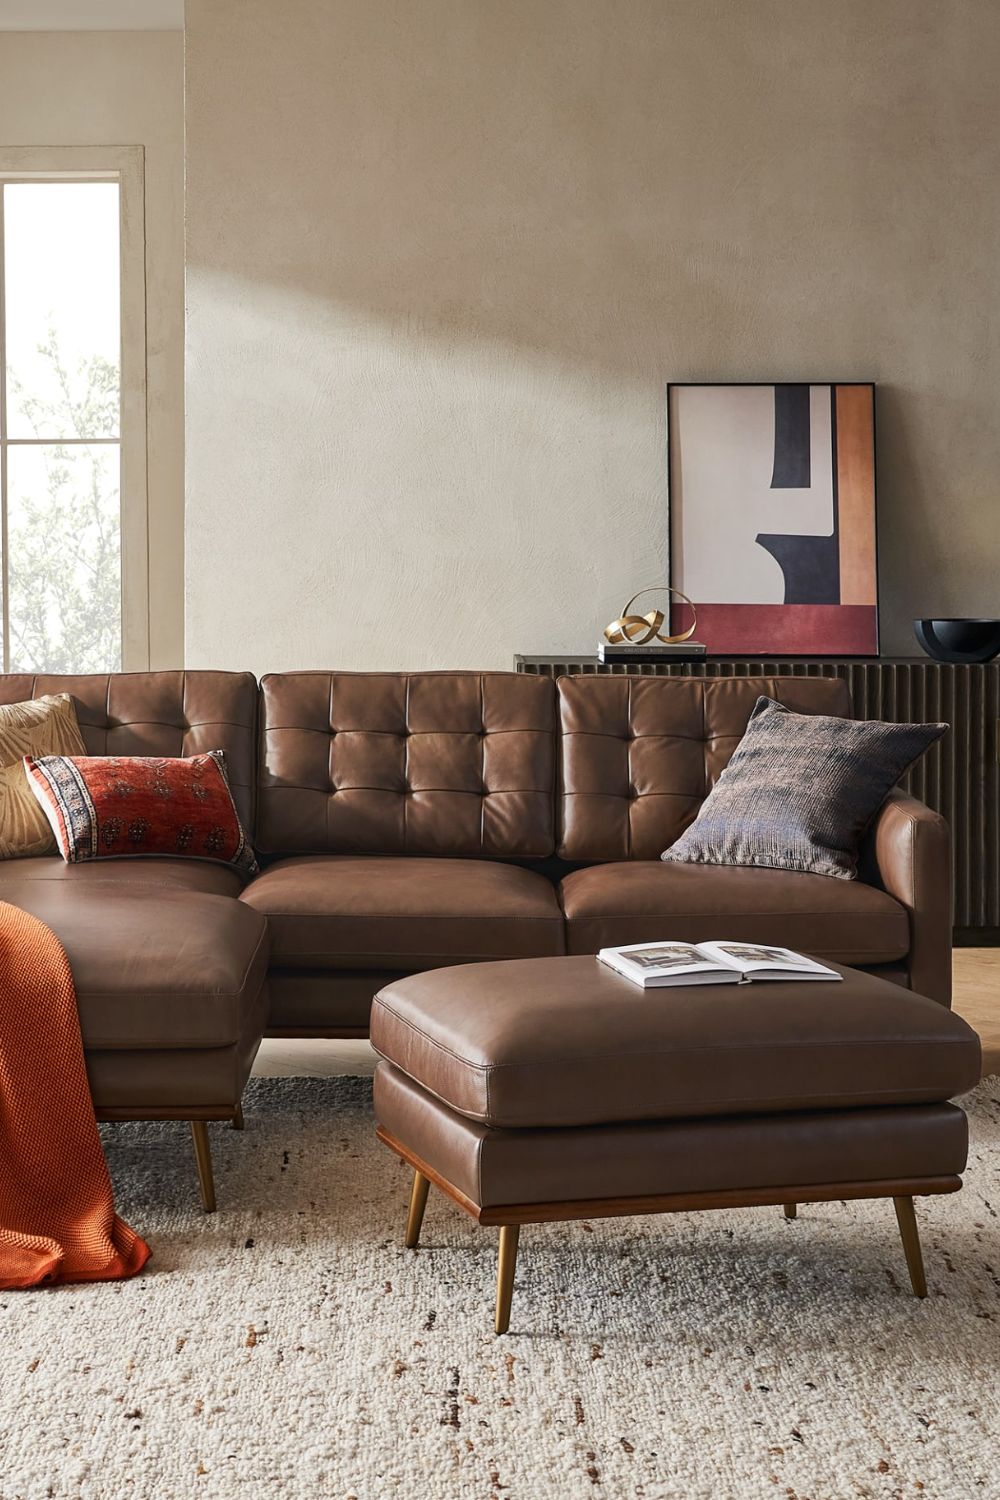 7 leather sofas that add old timey ambience in any living room